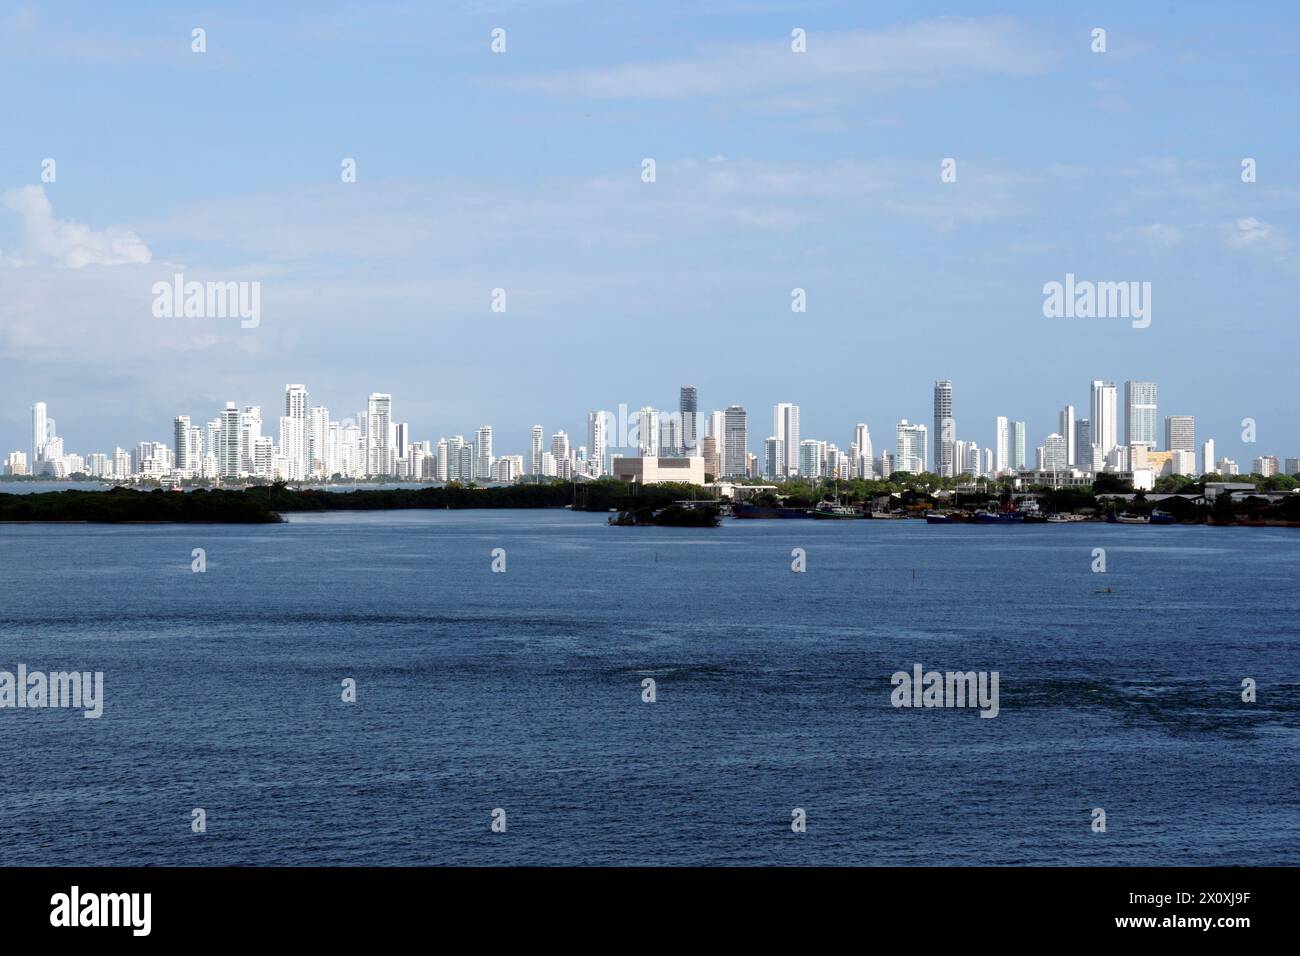 A distant silhouette of Cartegena, Colombia, with its tall modern buildings seen from the seaport on a sunny day. Stock Photo